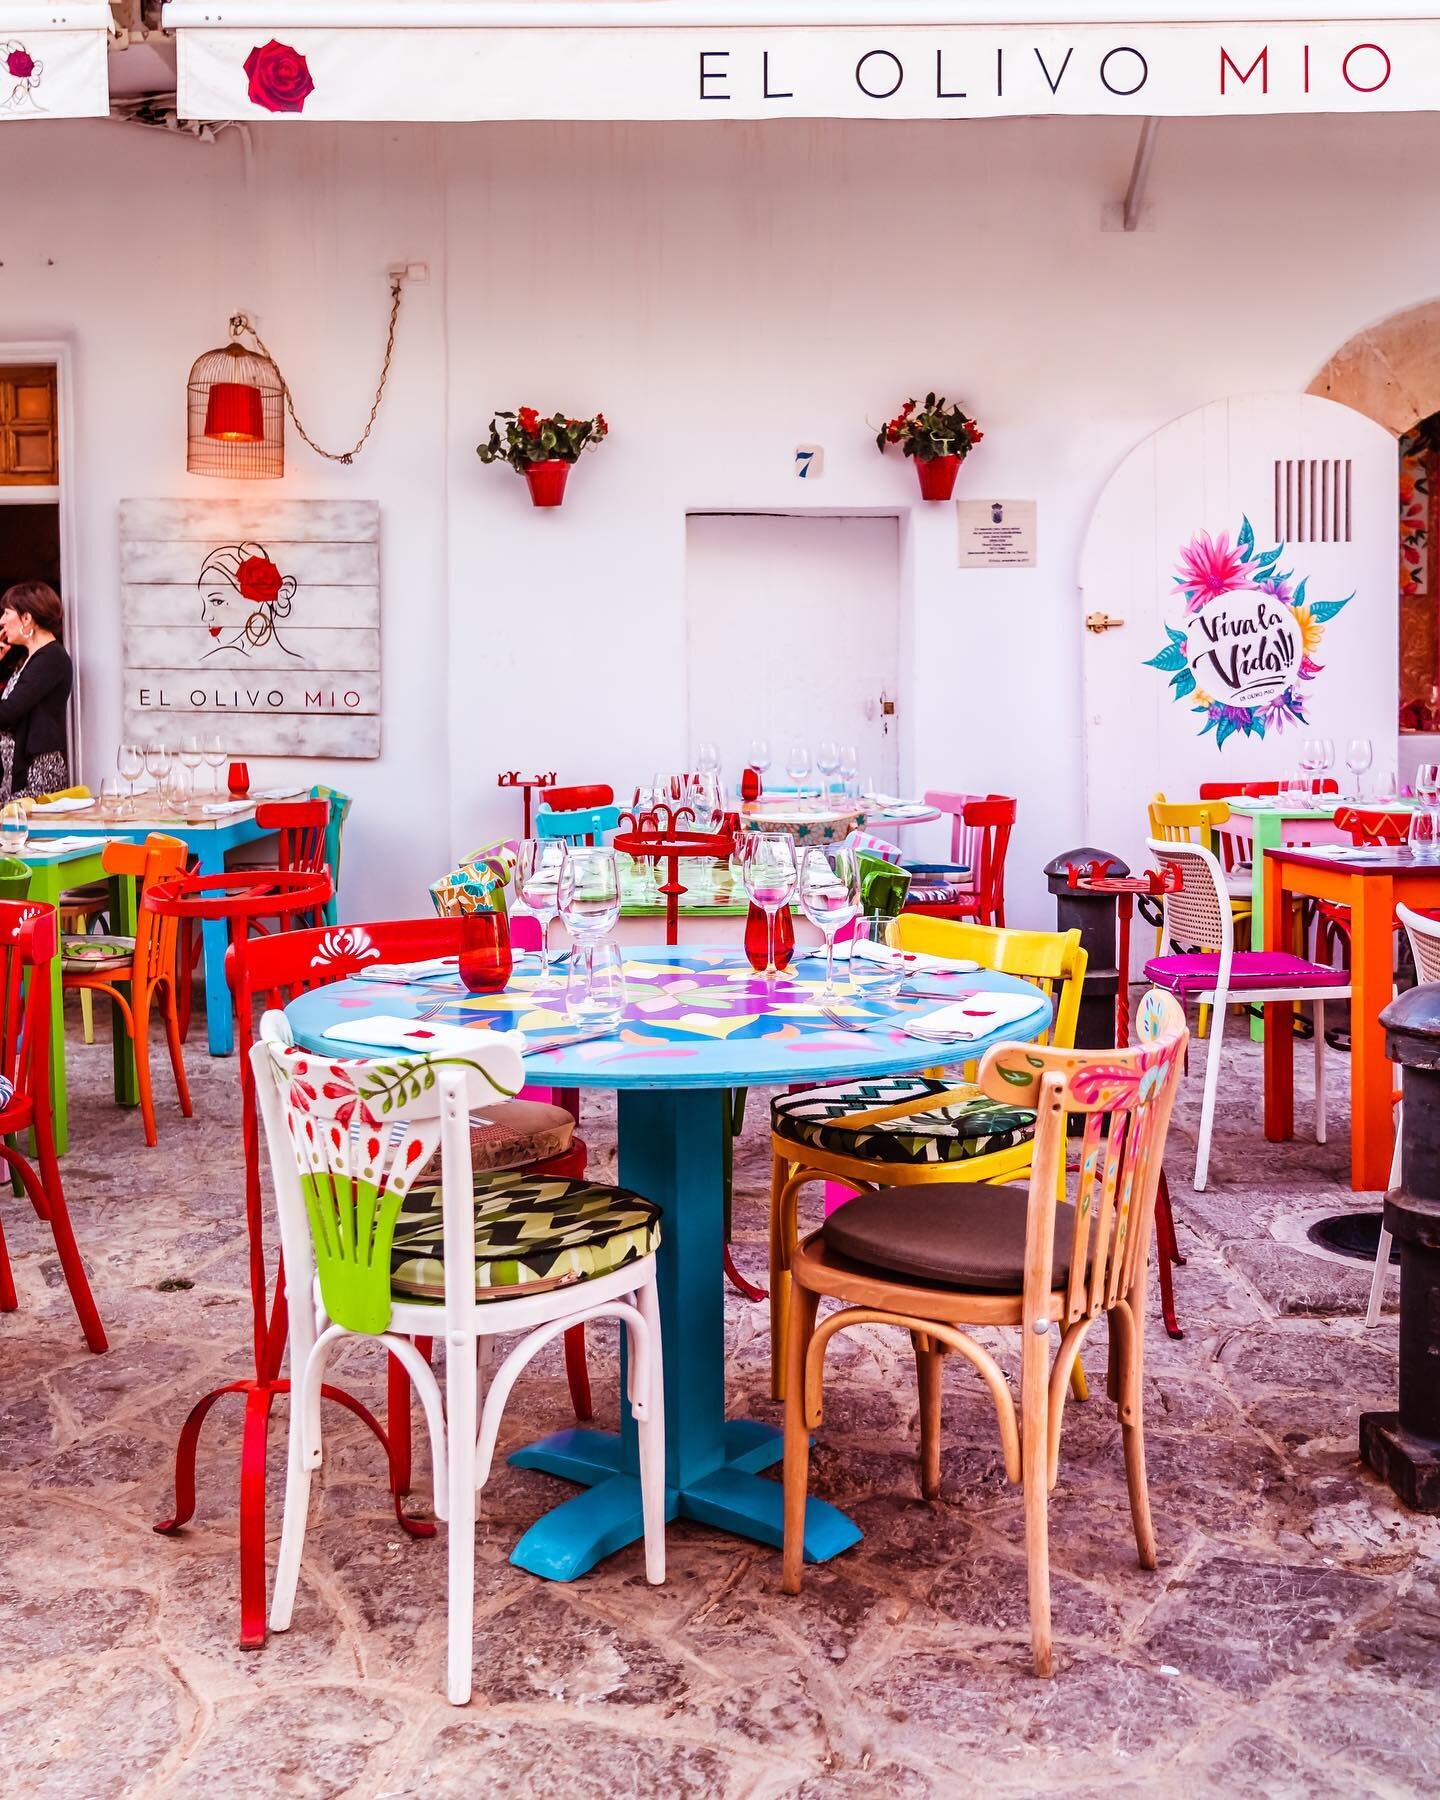 Discover the hidden gem of Ibiza at @elolivomioibiza, the restaurant that will make you fall in love with Mediterranean cuisine all over again ❤️